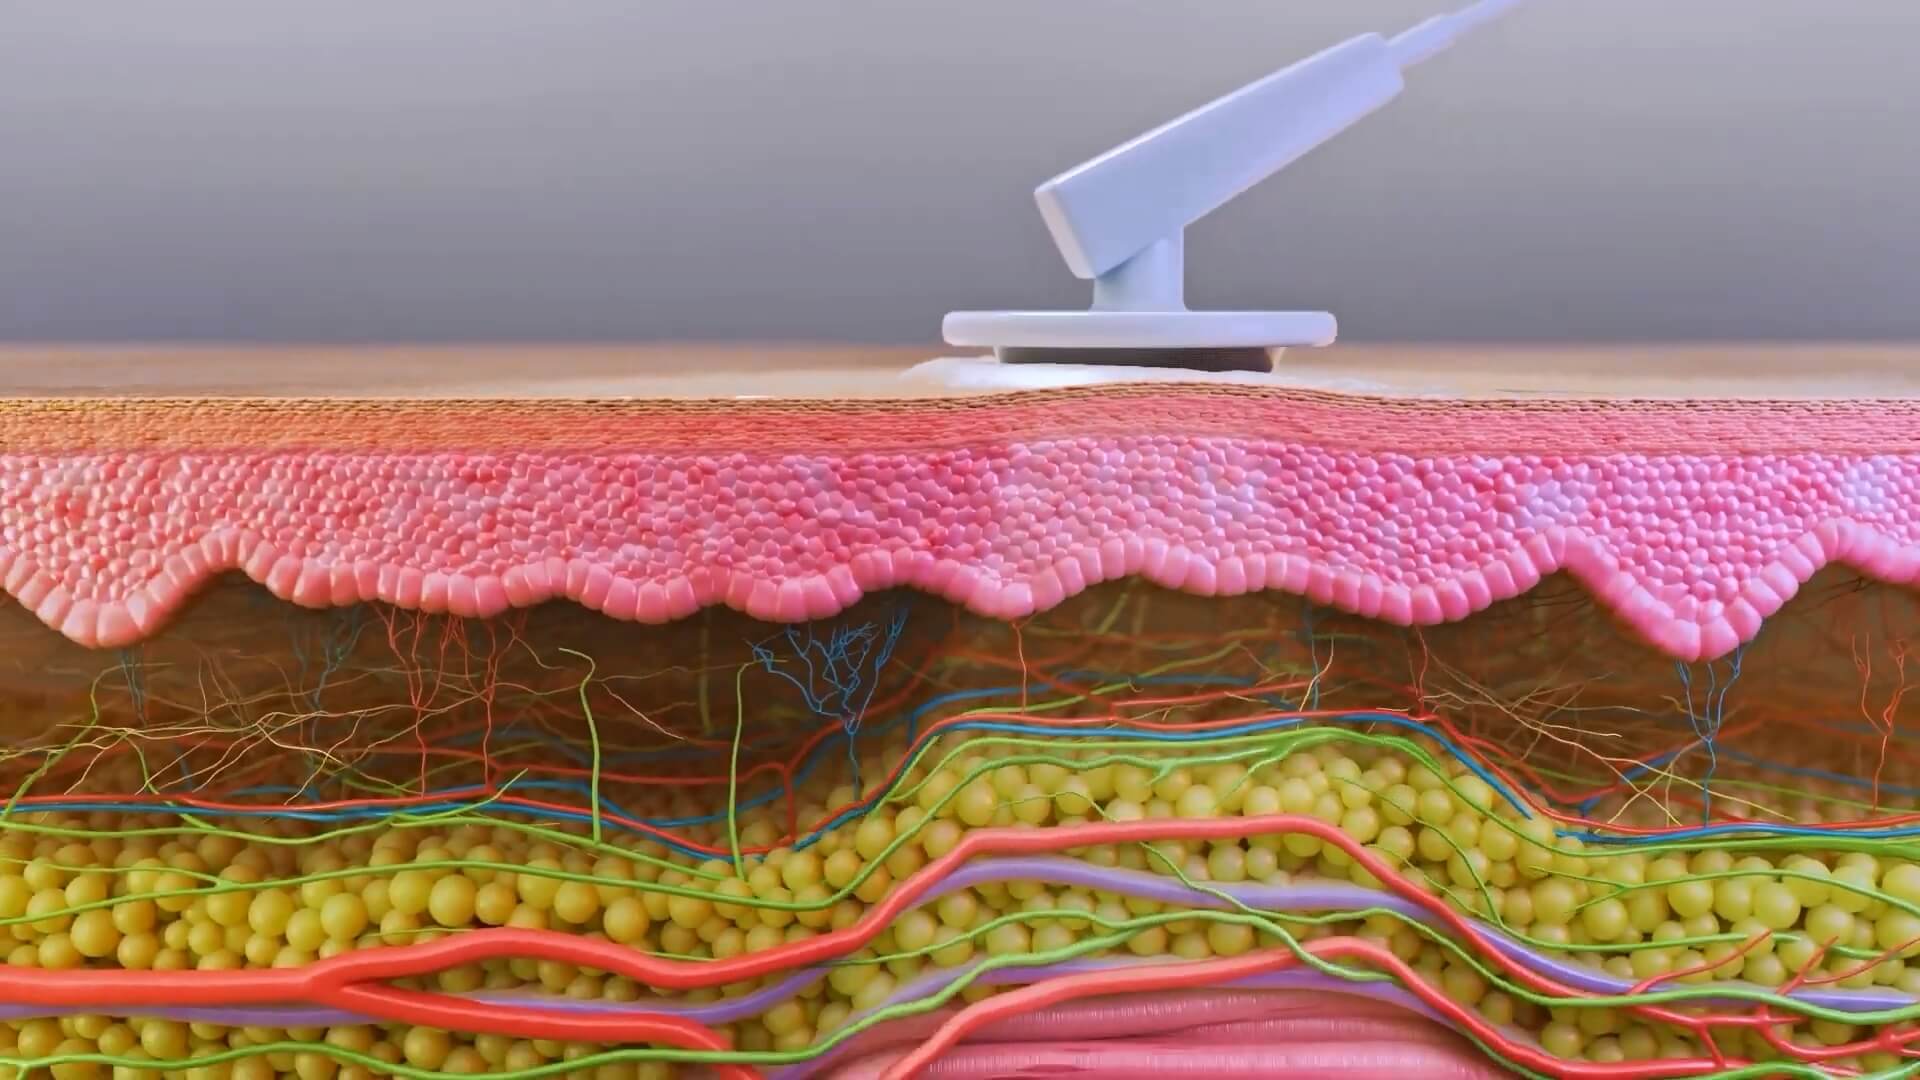 Medical animation can help dermatology